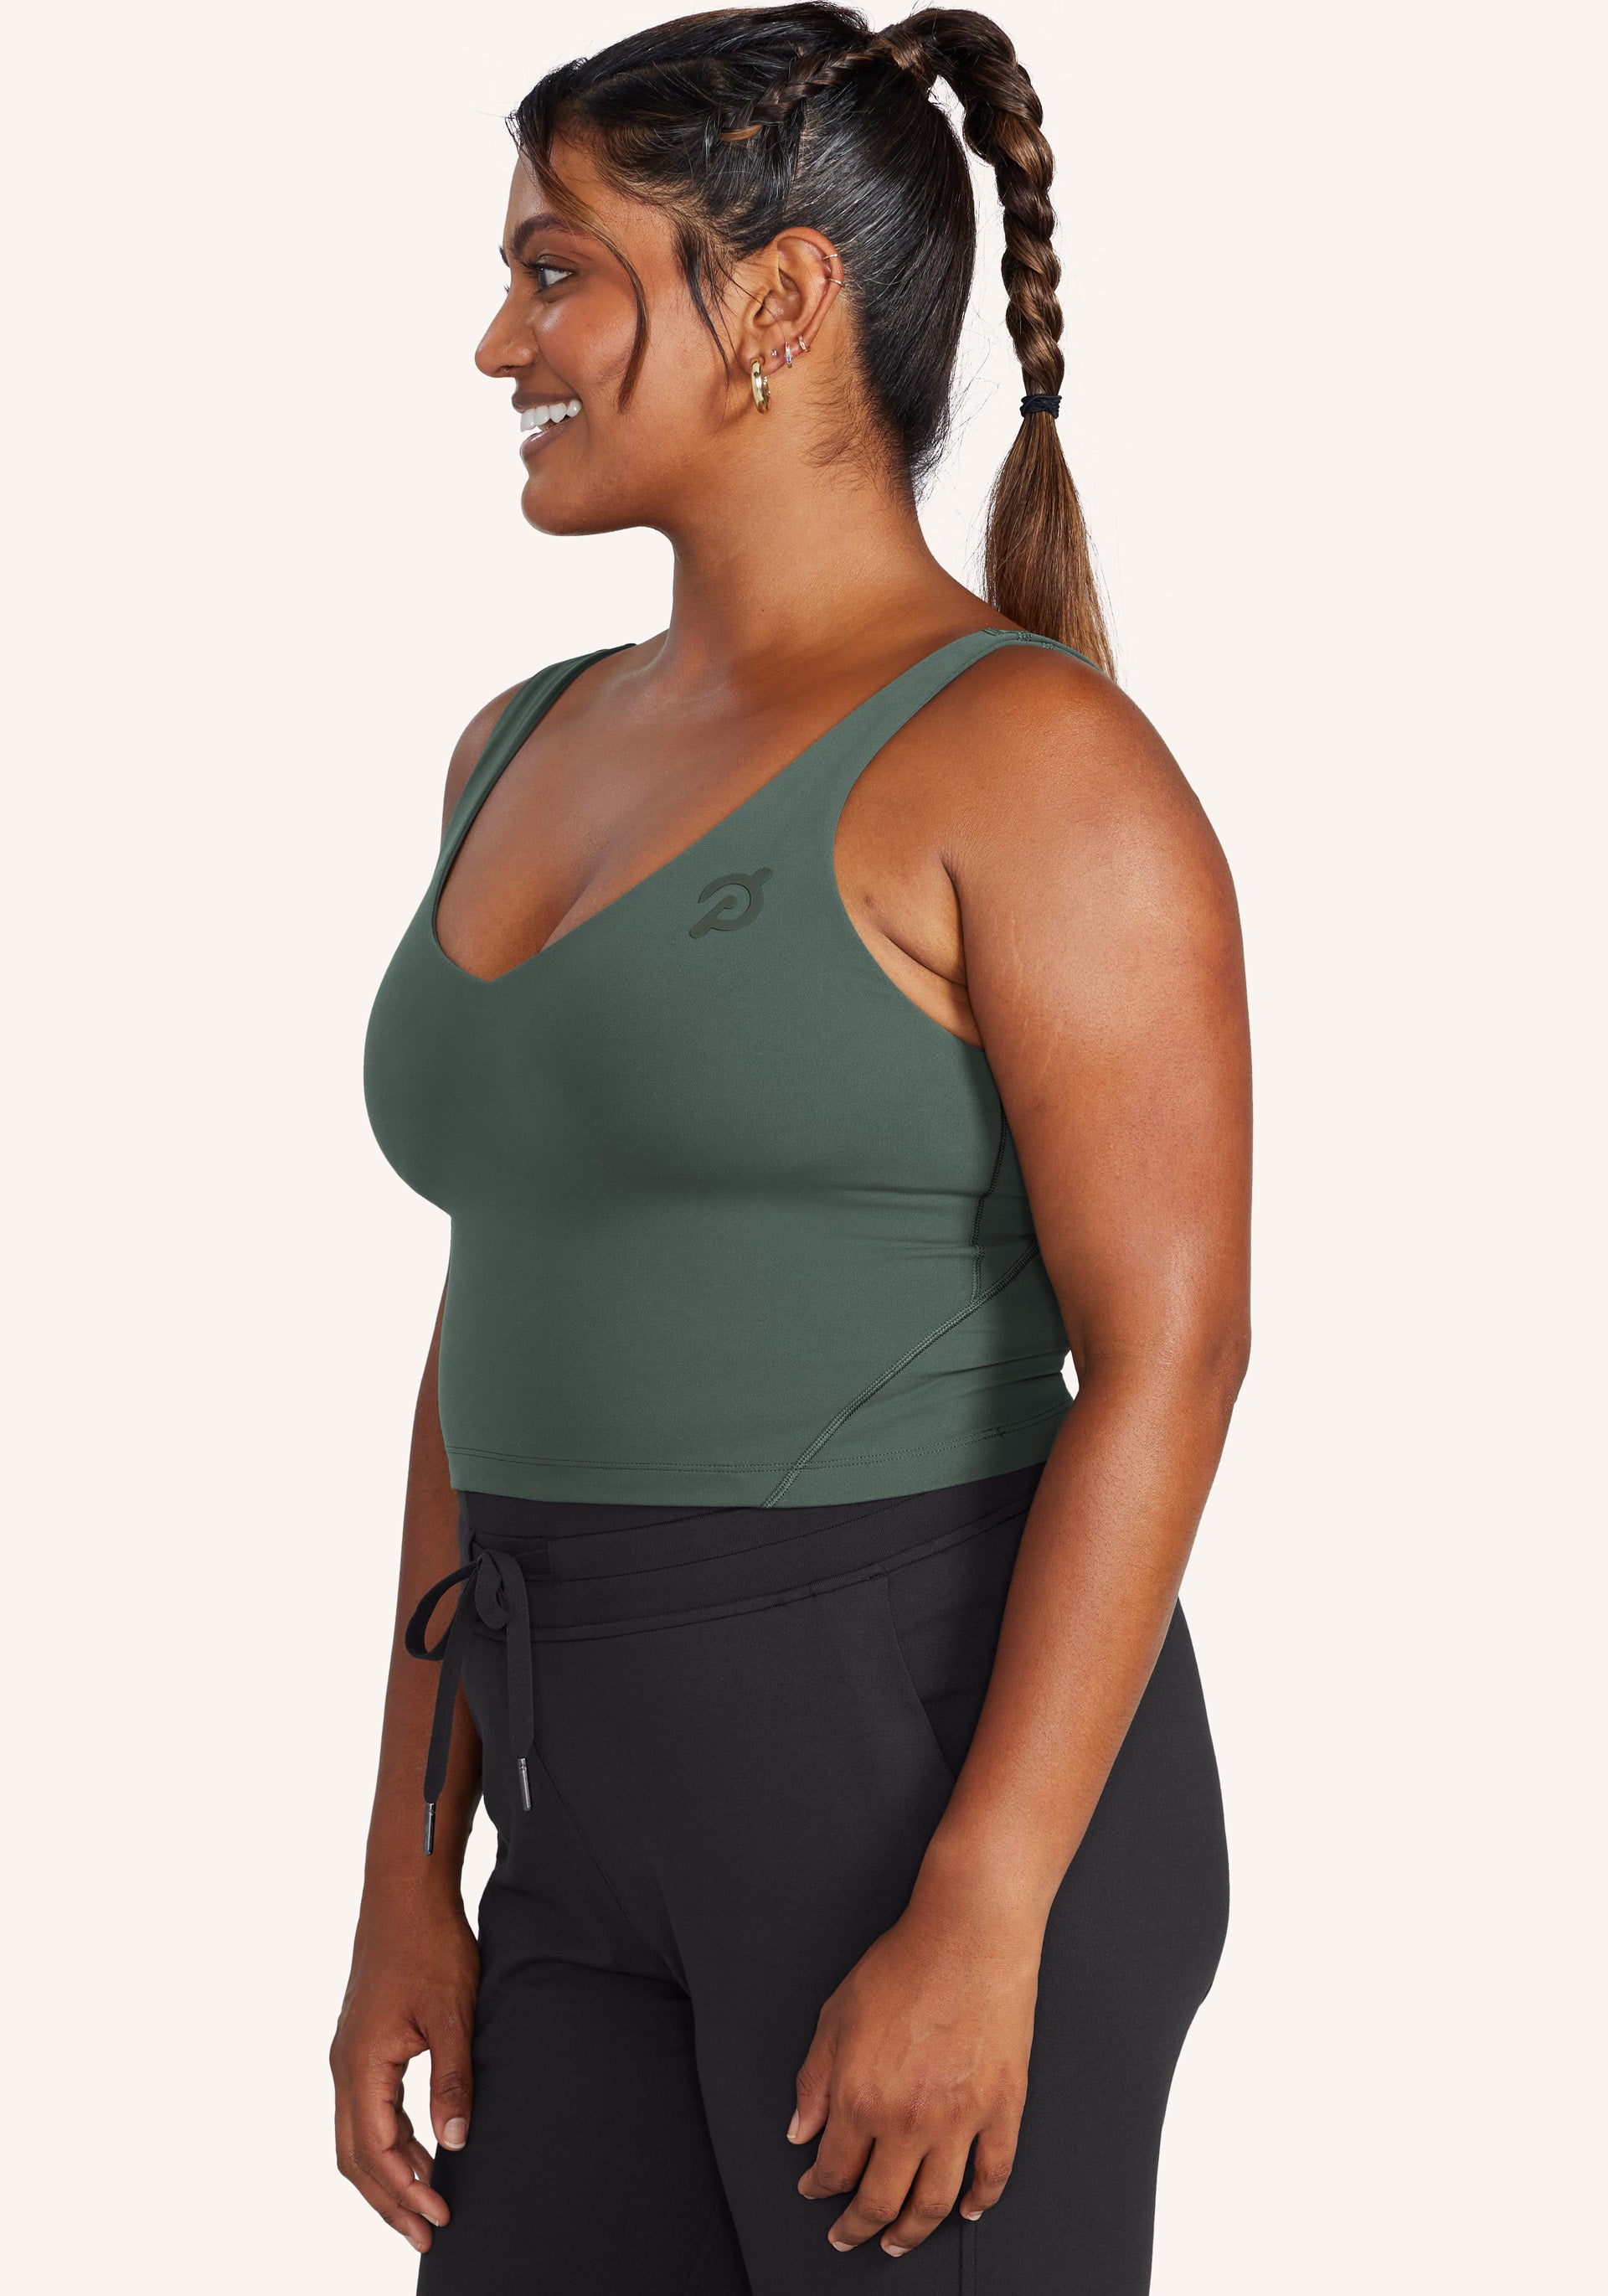 Align tank size comparison on a plus size body… no one asked for